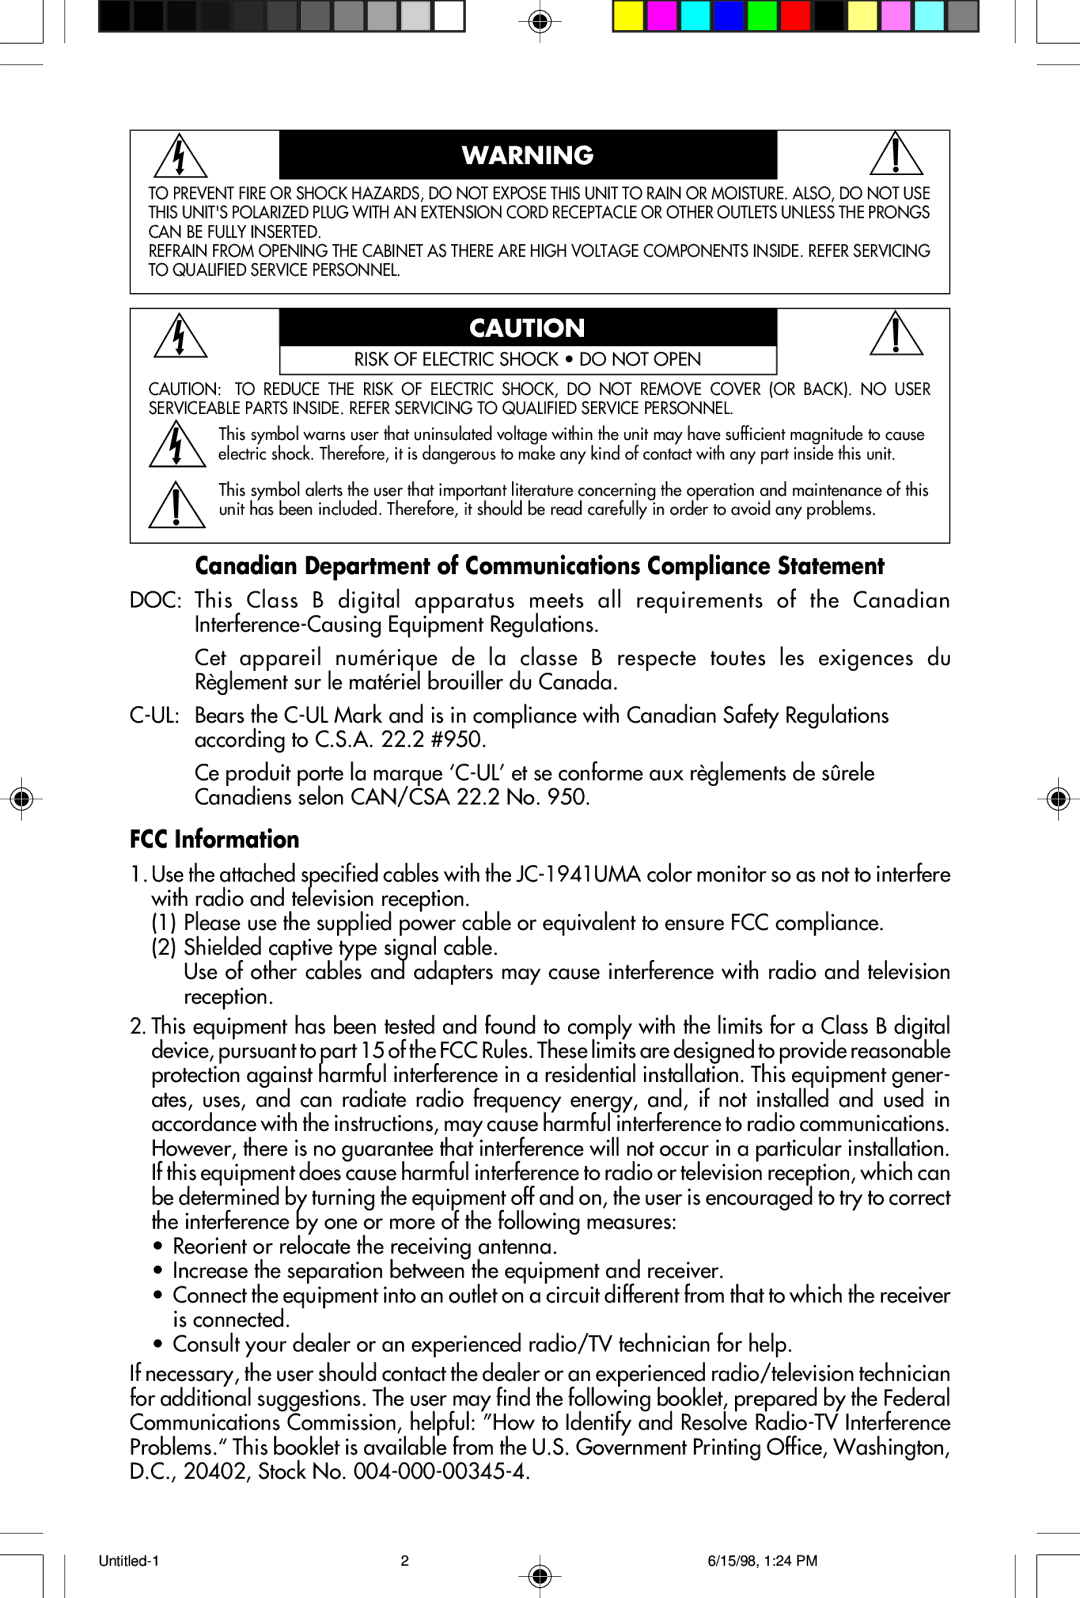 NEC JC-1941UMA user manual Canadian Department of Communications Compliance Statement, FCC Information 